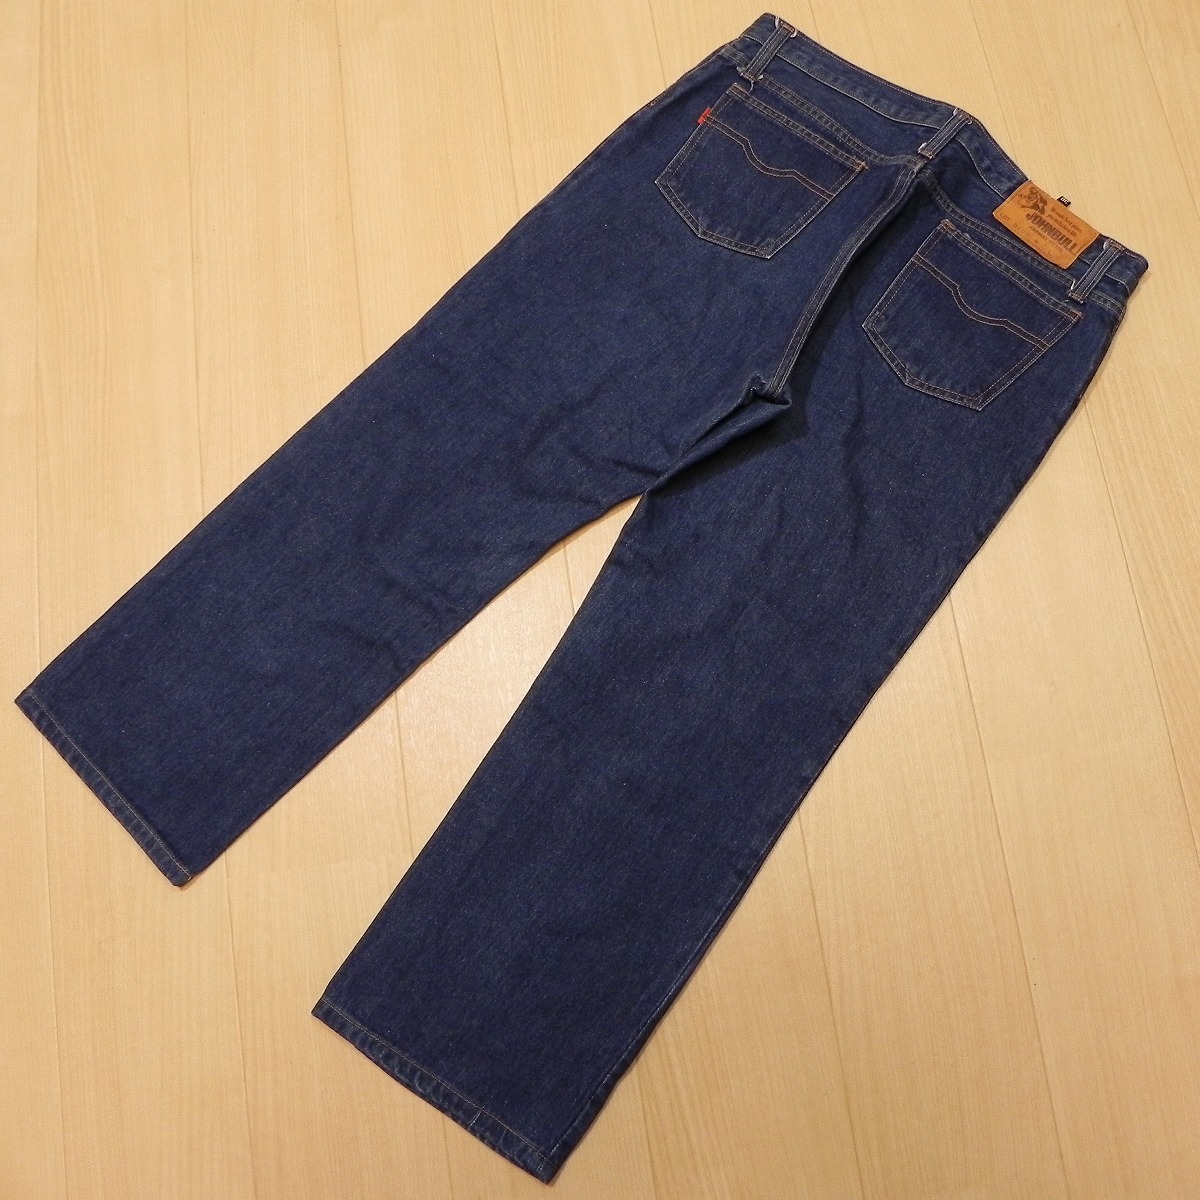 -522* that time thing the first period Vintage JOHNBULL LOT.8100 Johnbull Denim pants jeans W36 old clothes *